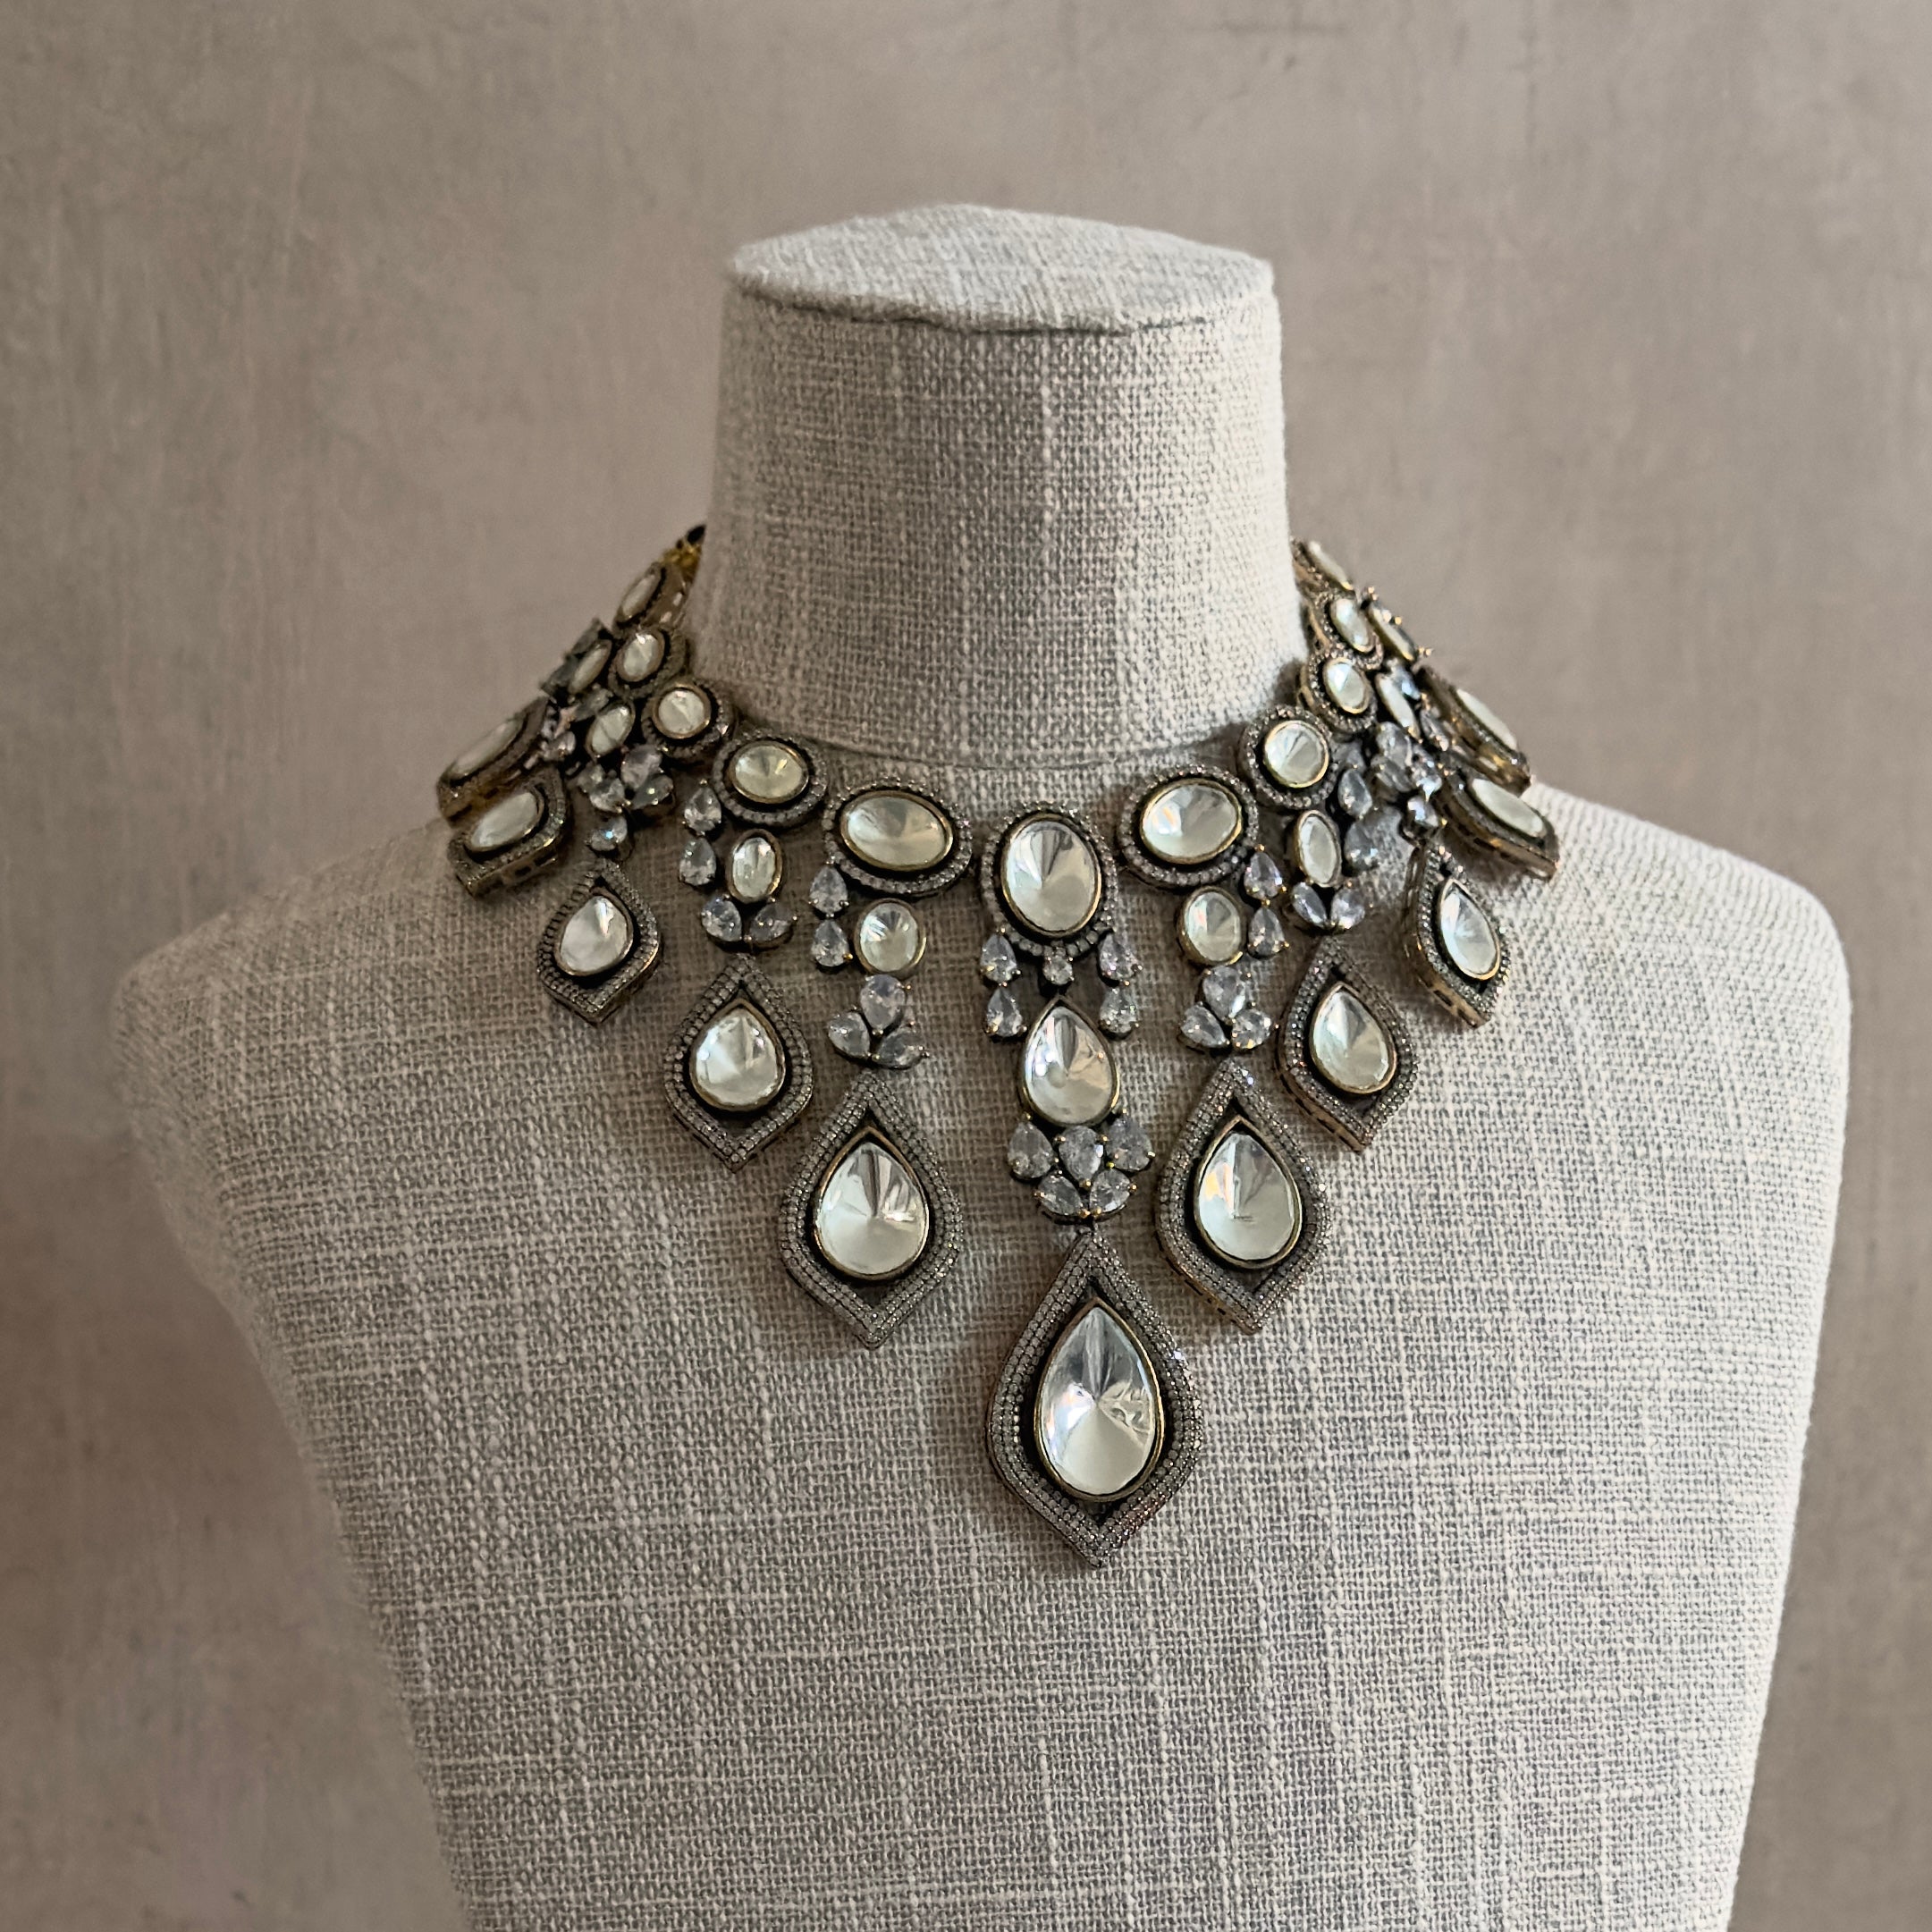 Channel the elegance and luxury of a peacock with our Polki Choker Set. Adorned with statement Polki and cz crystals, featuring an adjustable tie, this set exudes sophistication and style. Complete the look with the matching earrings for a truly stunning and exclusive ensemble.